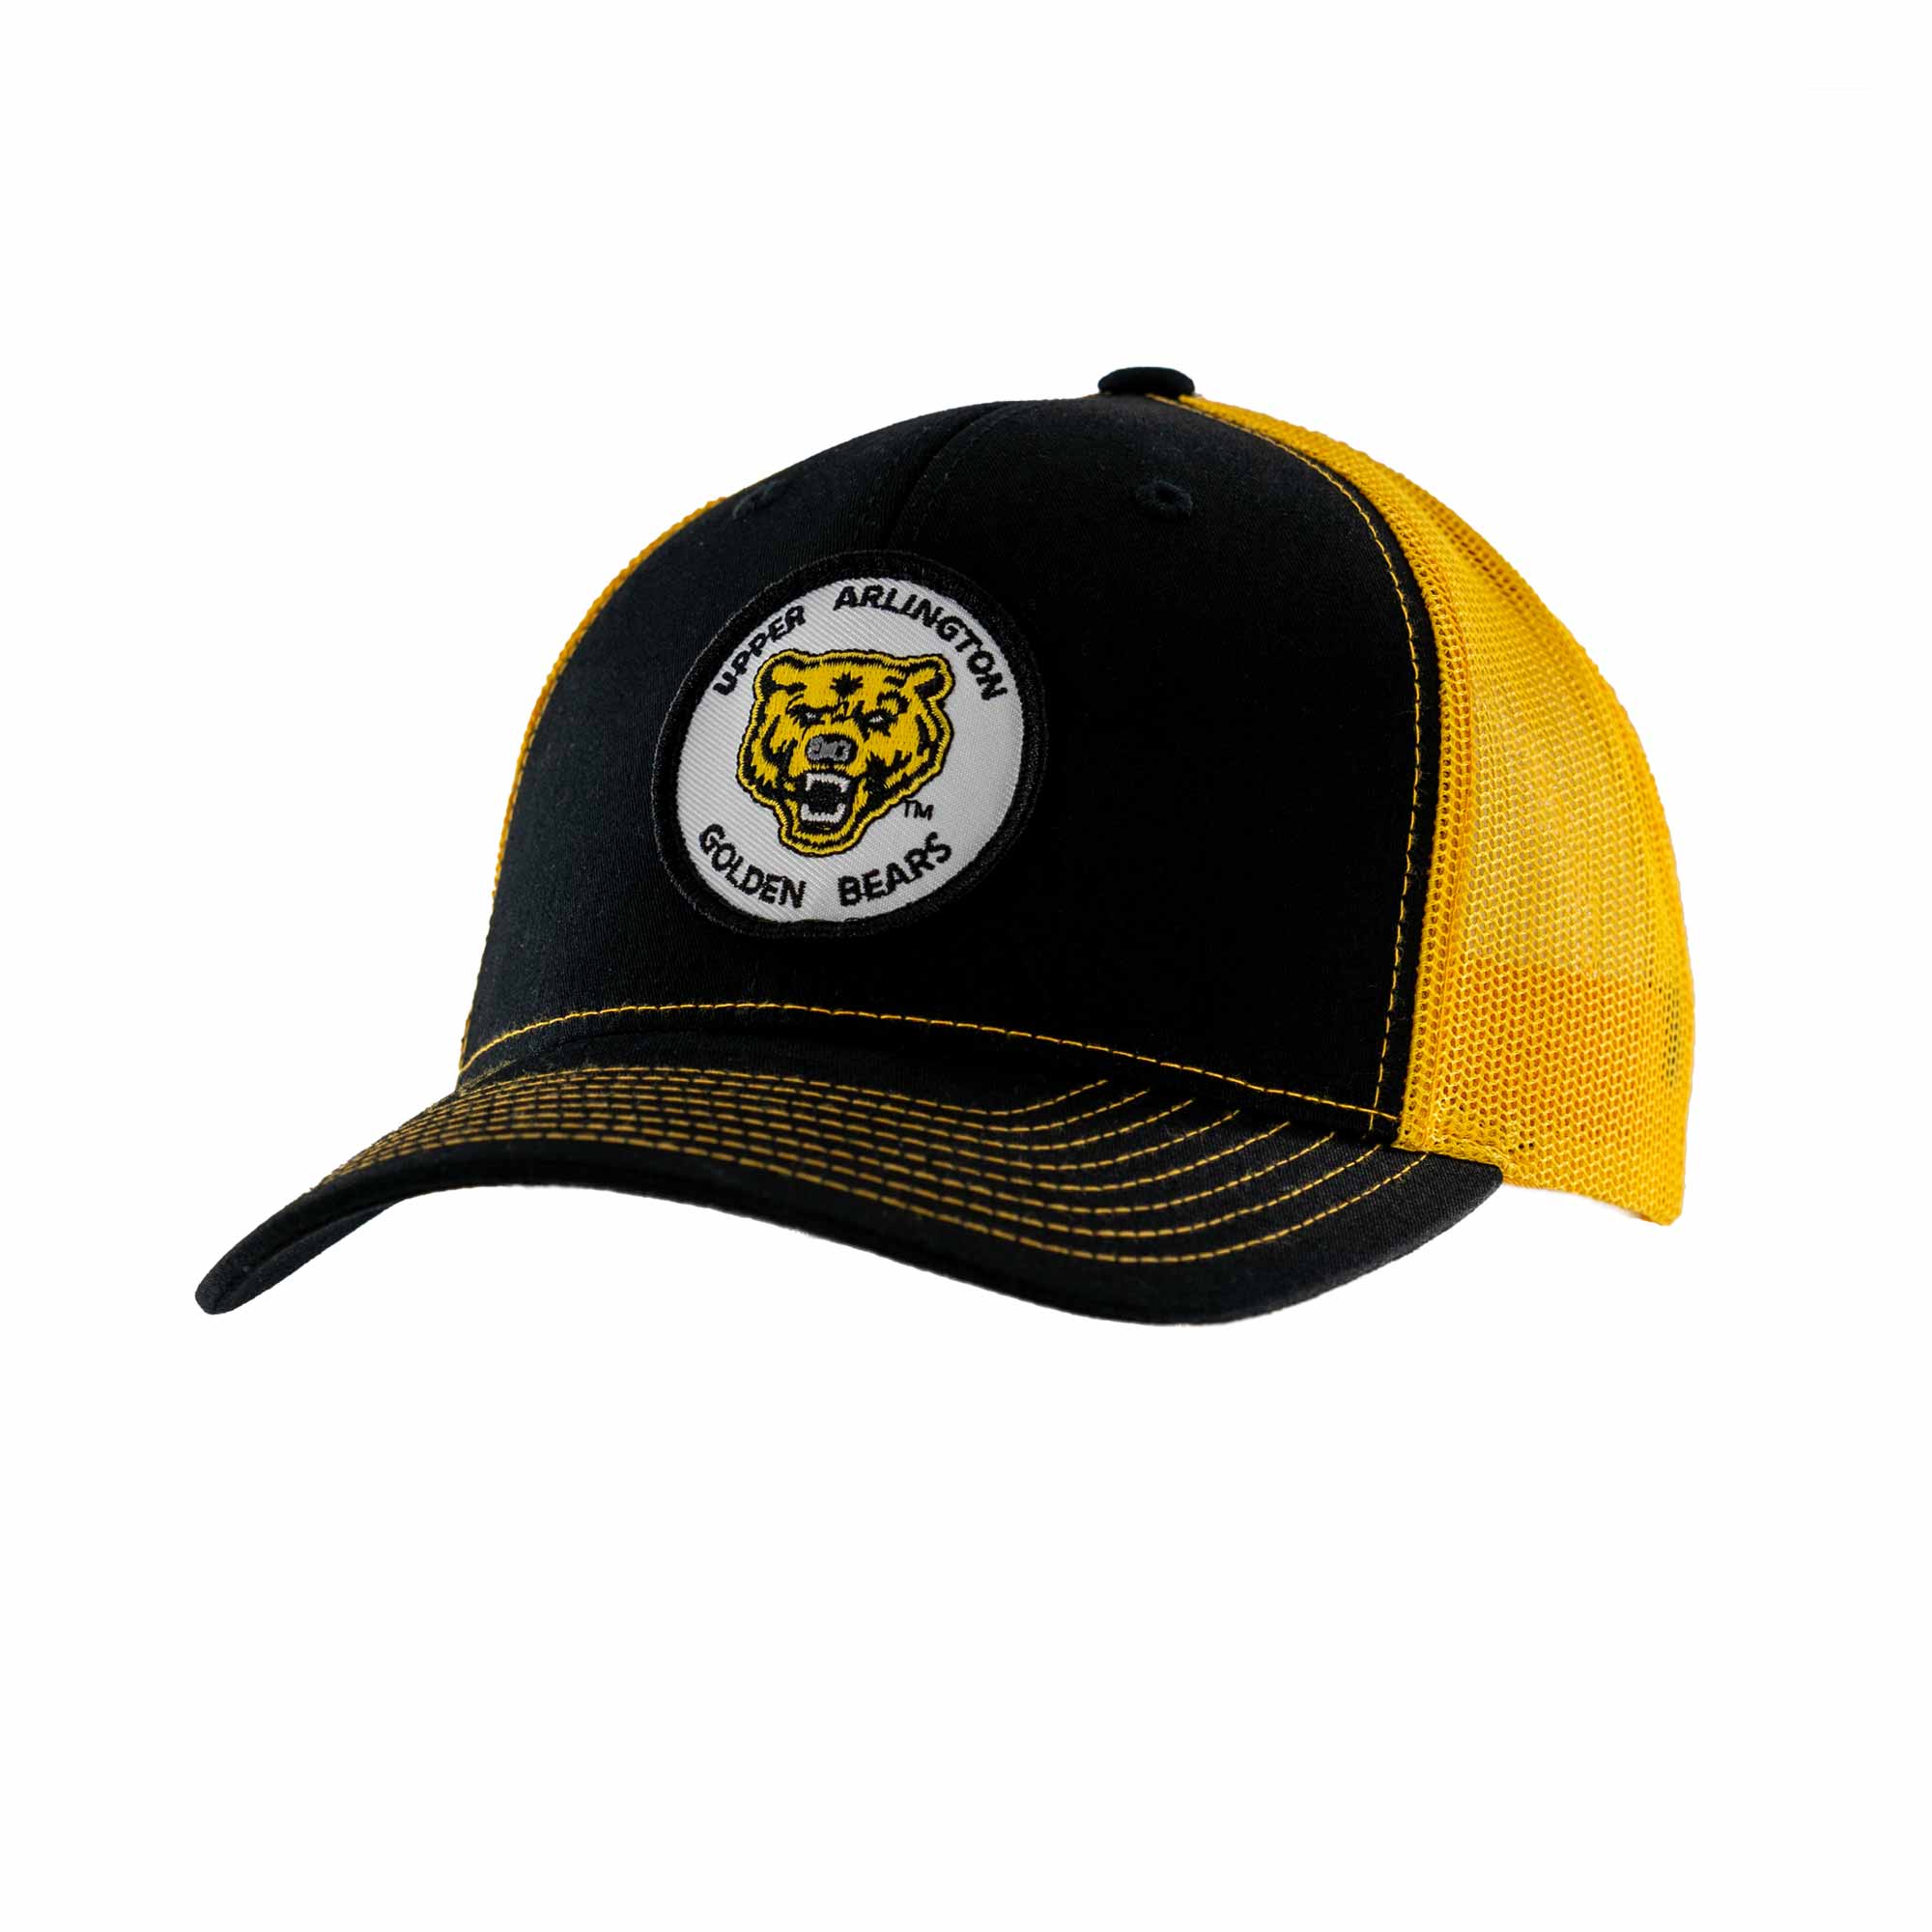 Scioto Made Upper Arlington Golden Bears Patch Trucker Hat in black and yellow. Structured 6 panel trucker hat.